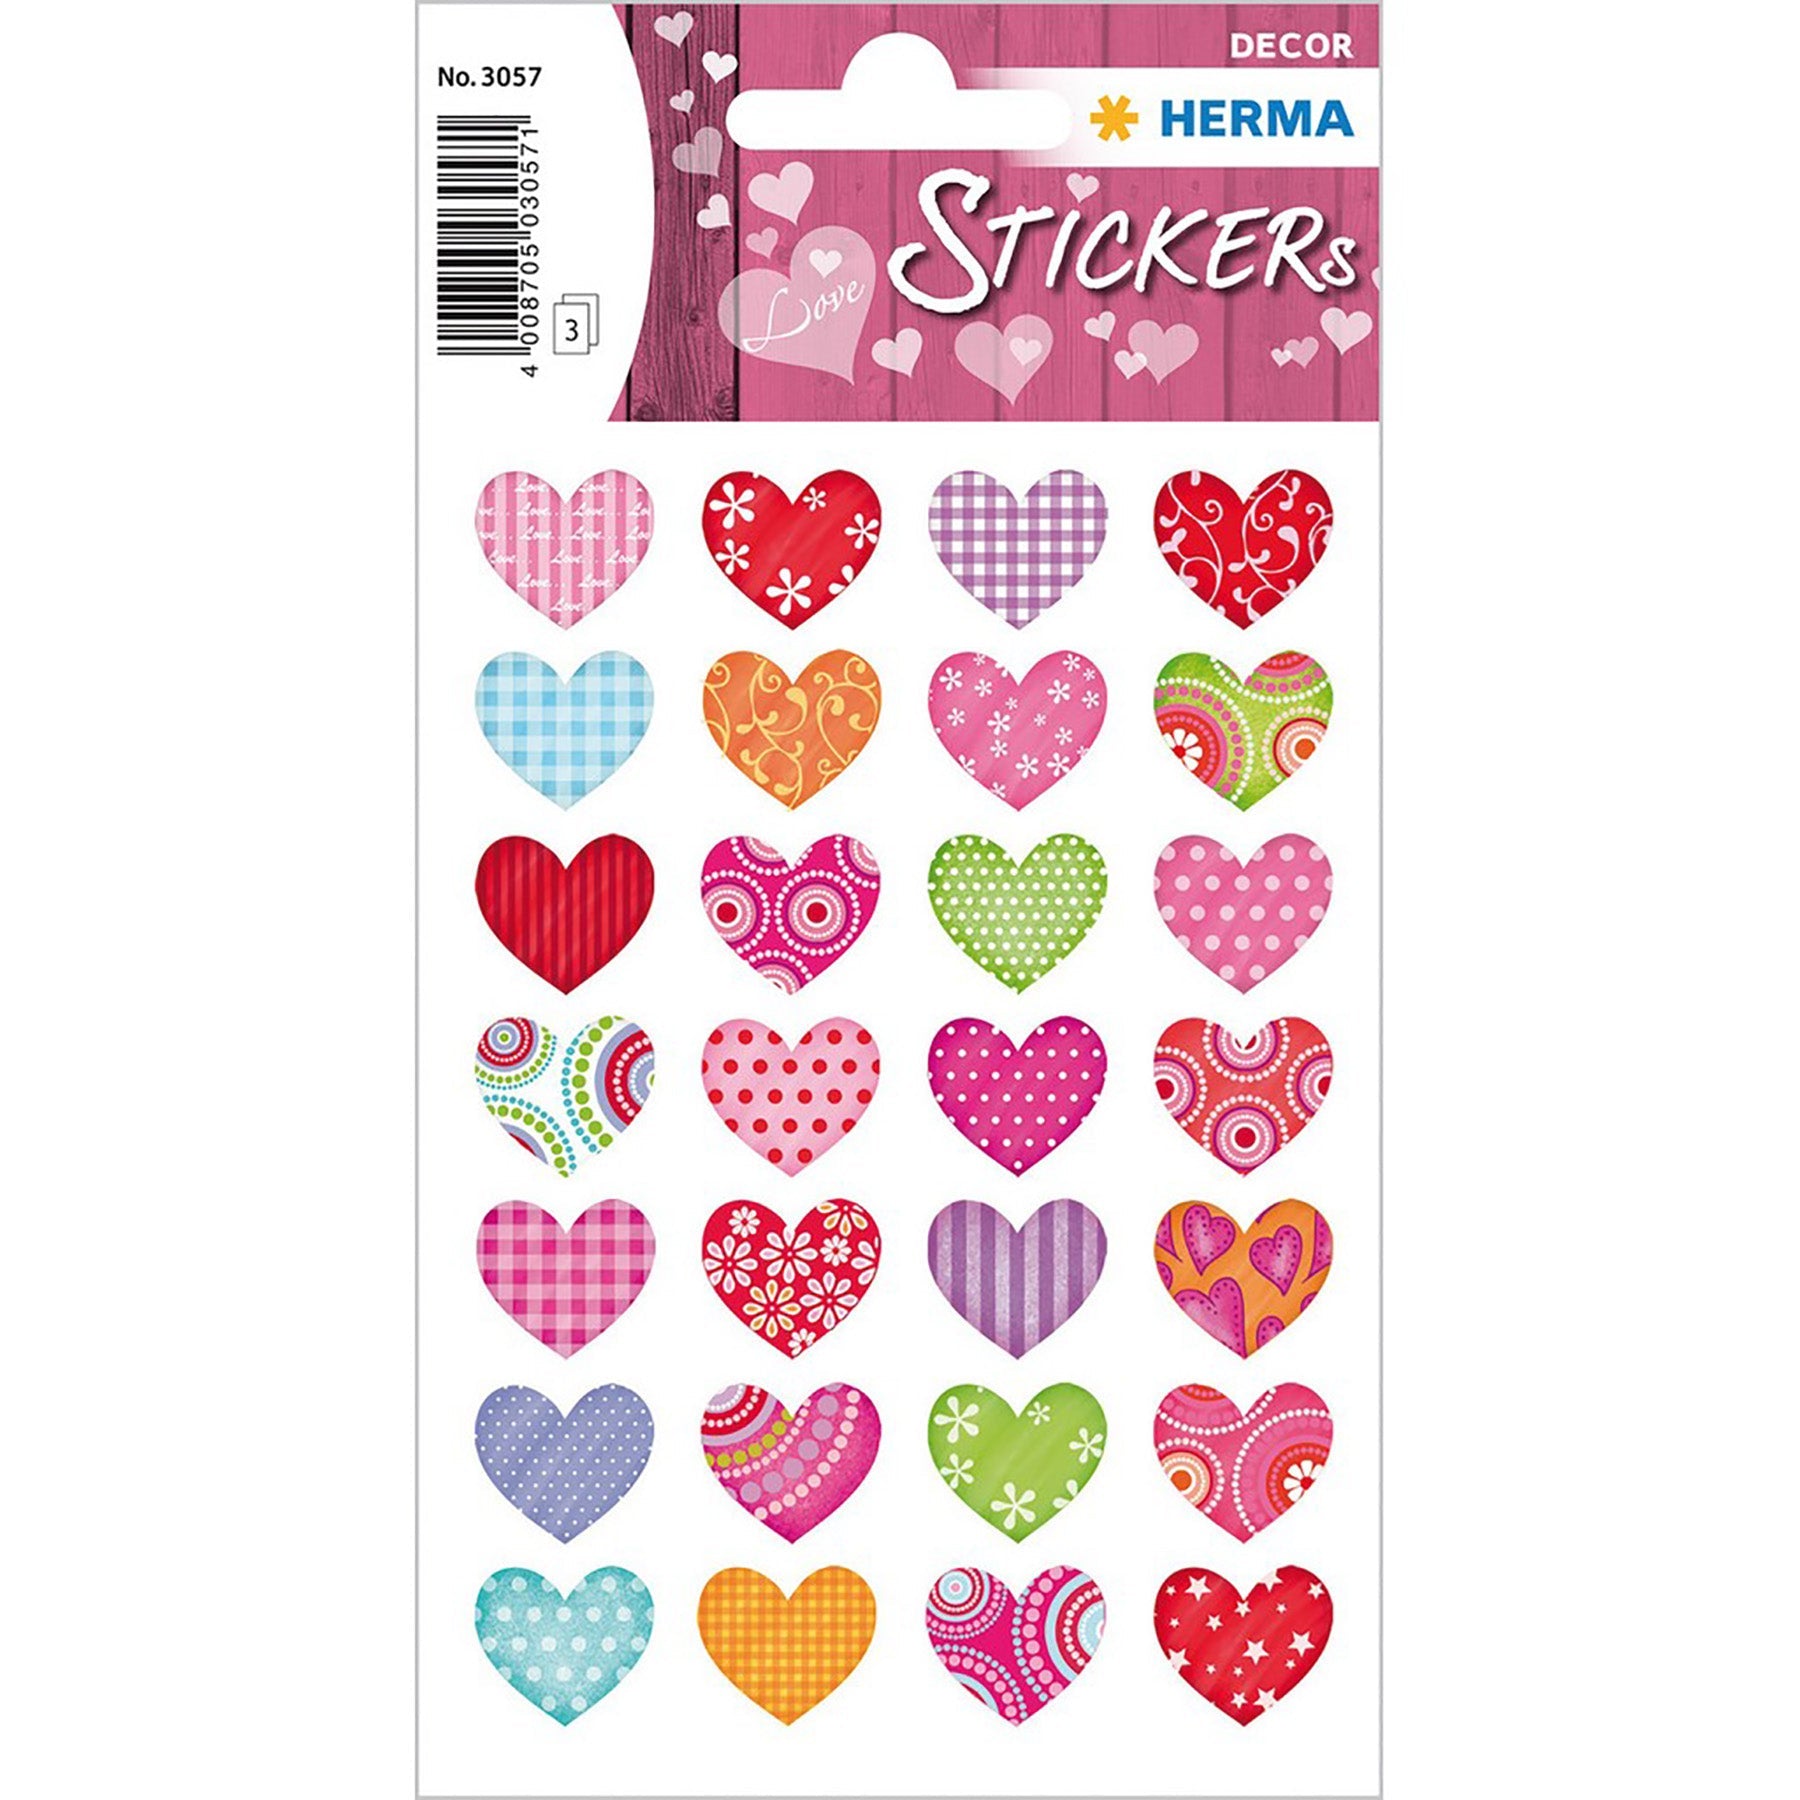 Herma Decor 3 Sheets Stickers Colorful Hearts 4.75x3.1in Sheet